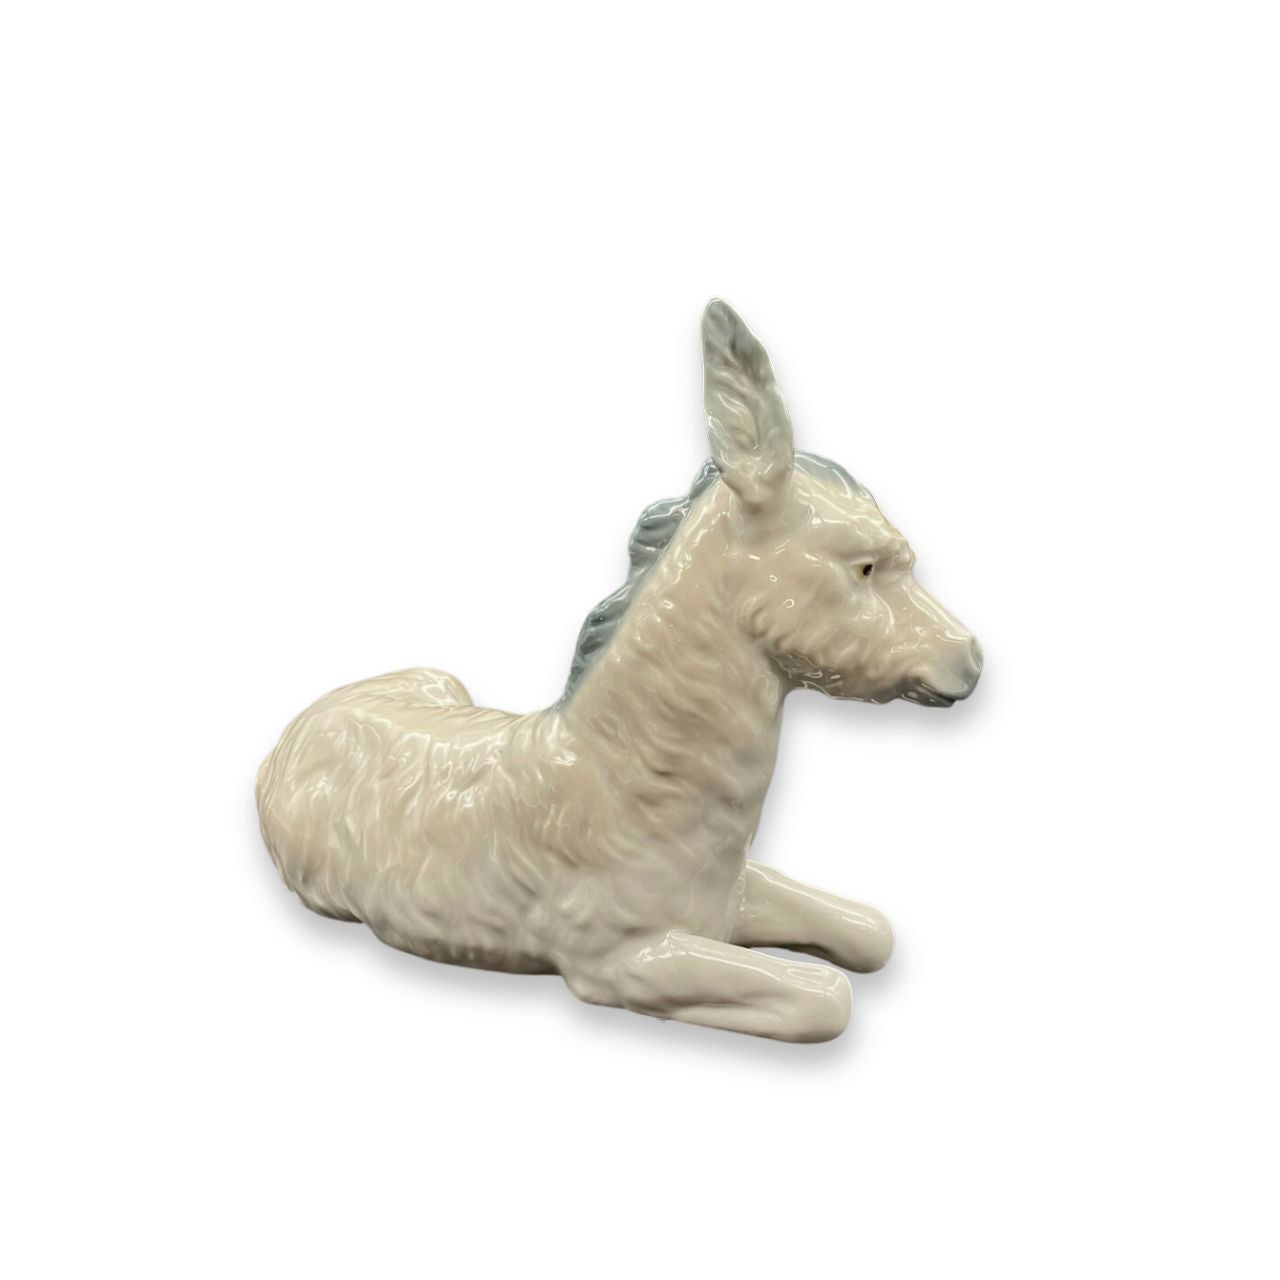 Nao by Lladro Nativity Donkey  Nao porcelain figurine “Donkey” from the Christmas Collection.  Sculpted by Salvador Furió, this figurine is part of the nativity set.